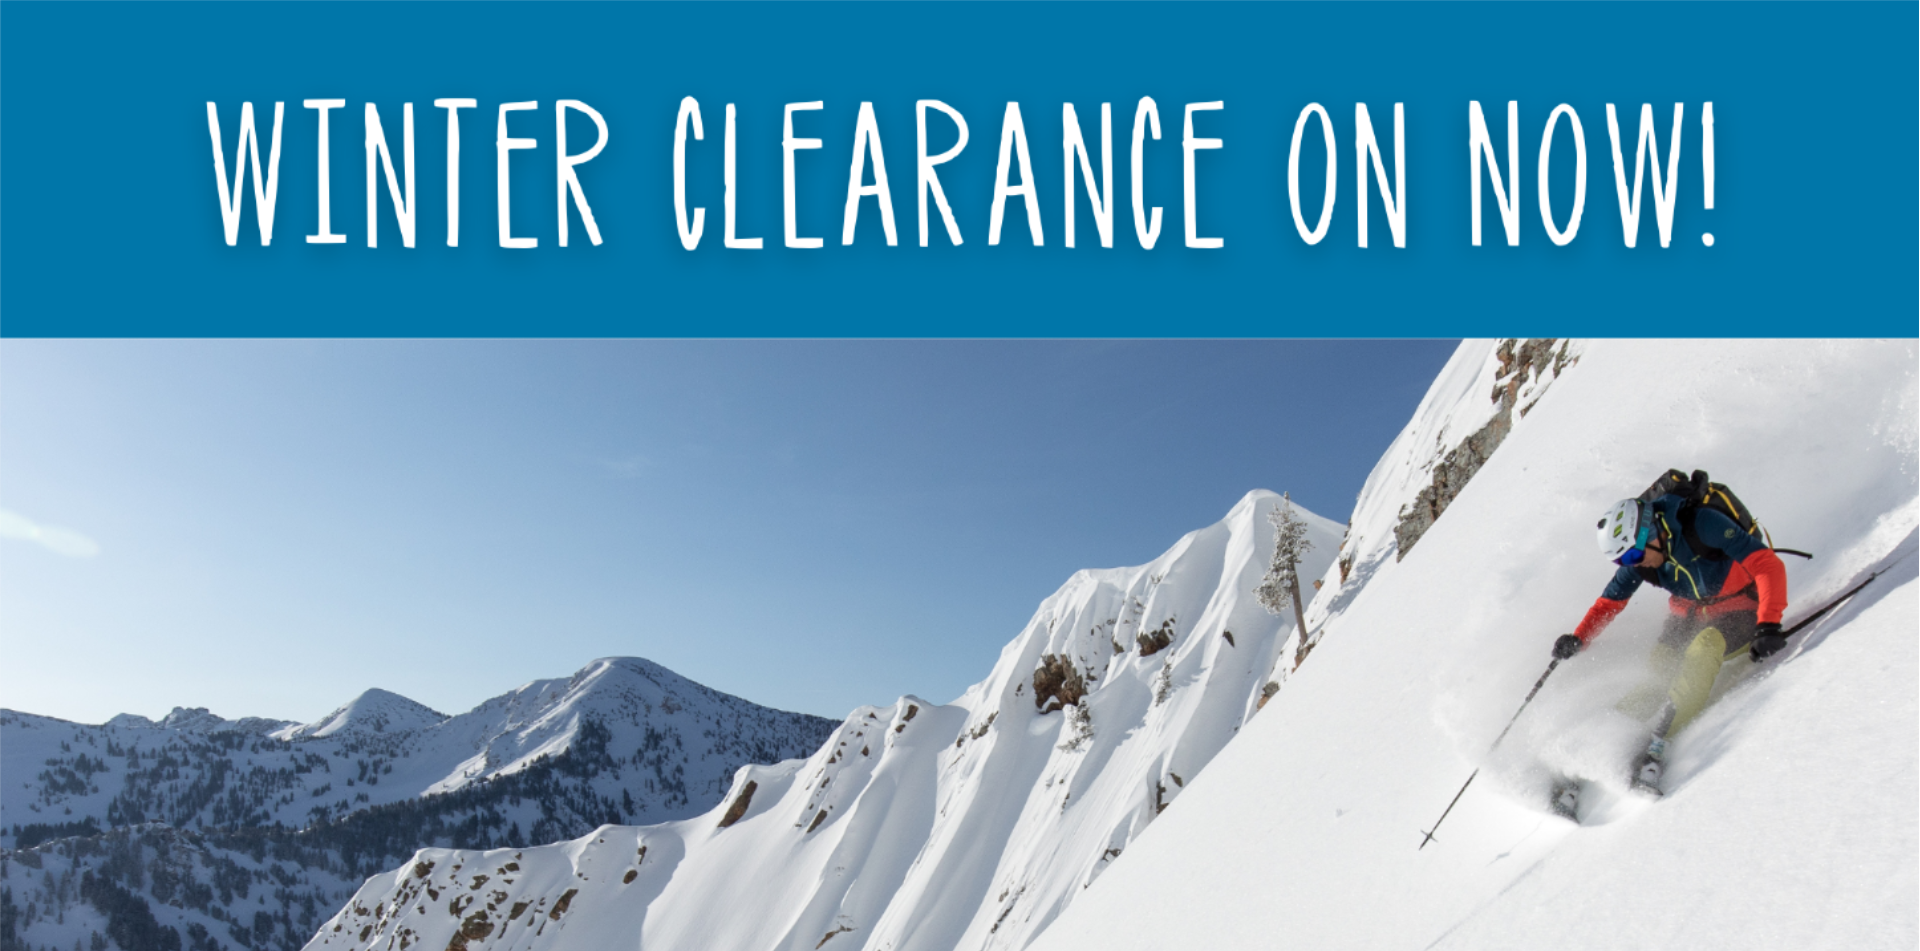 Winter Clearance Sale On Now!